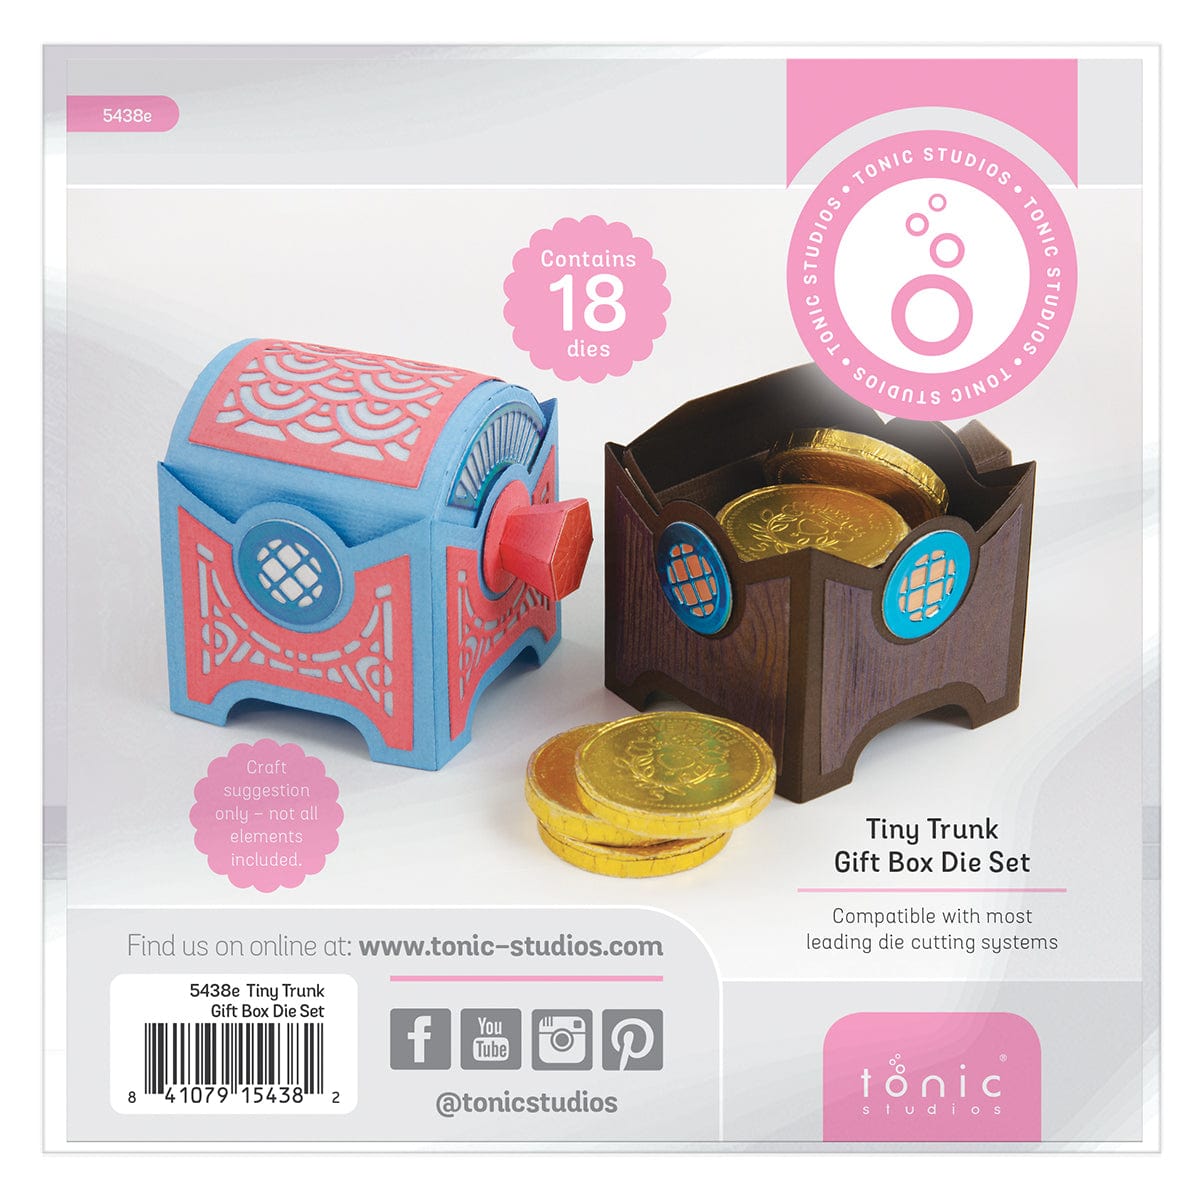 Candle Making Kit – Geppetto's Toy Box